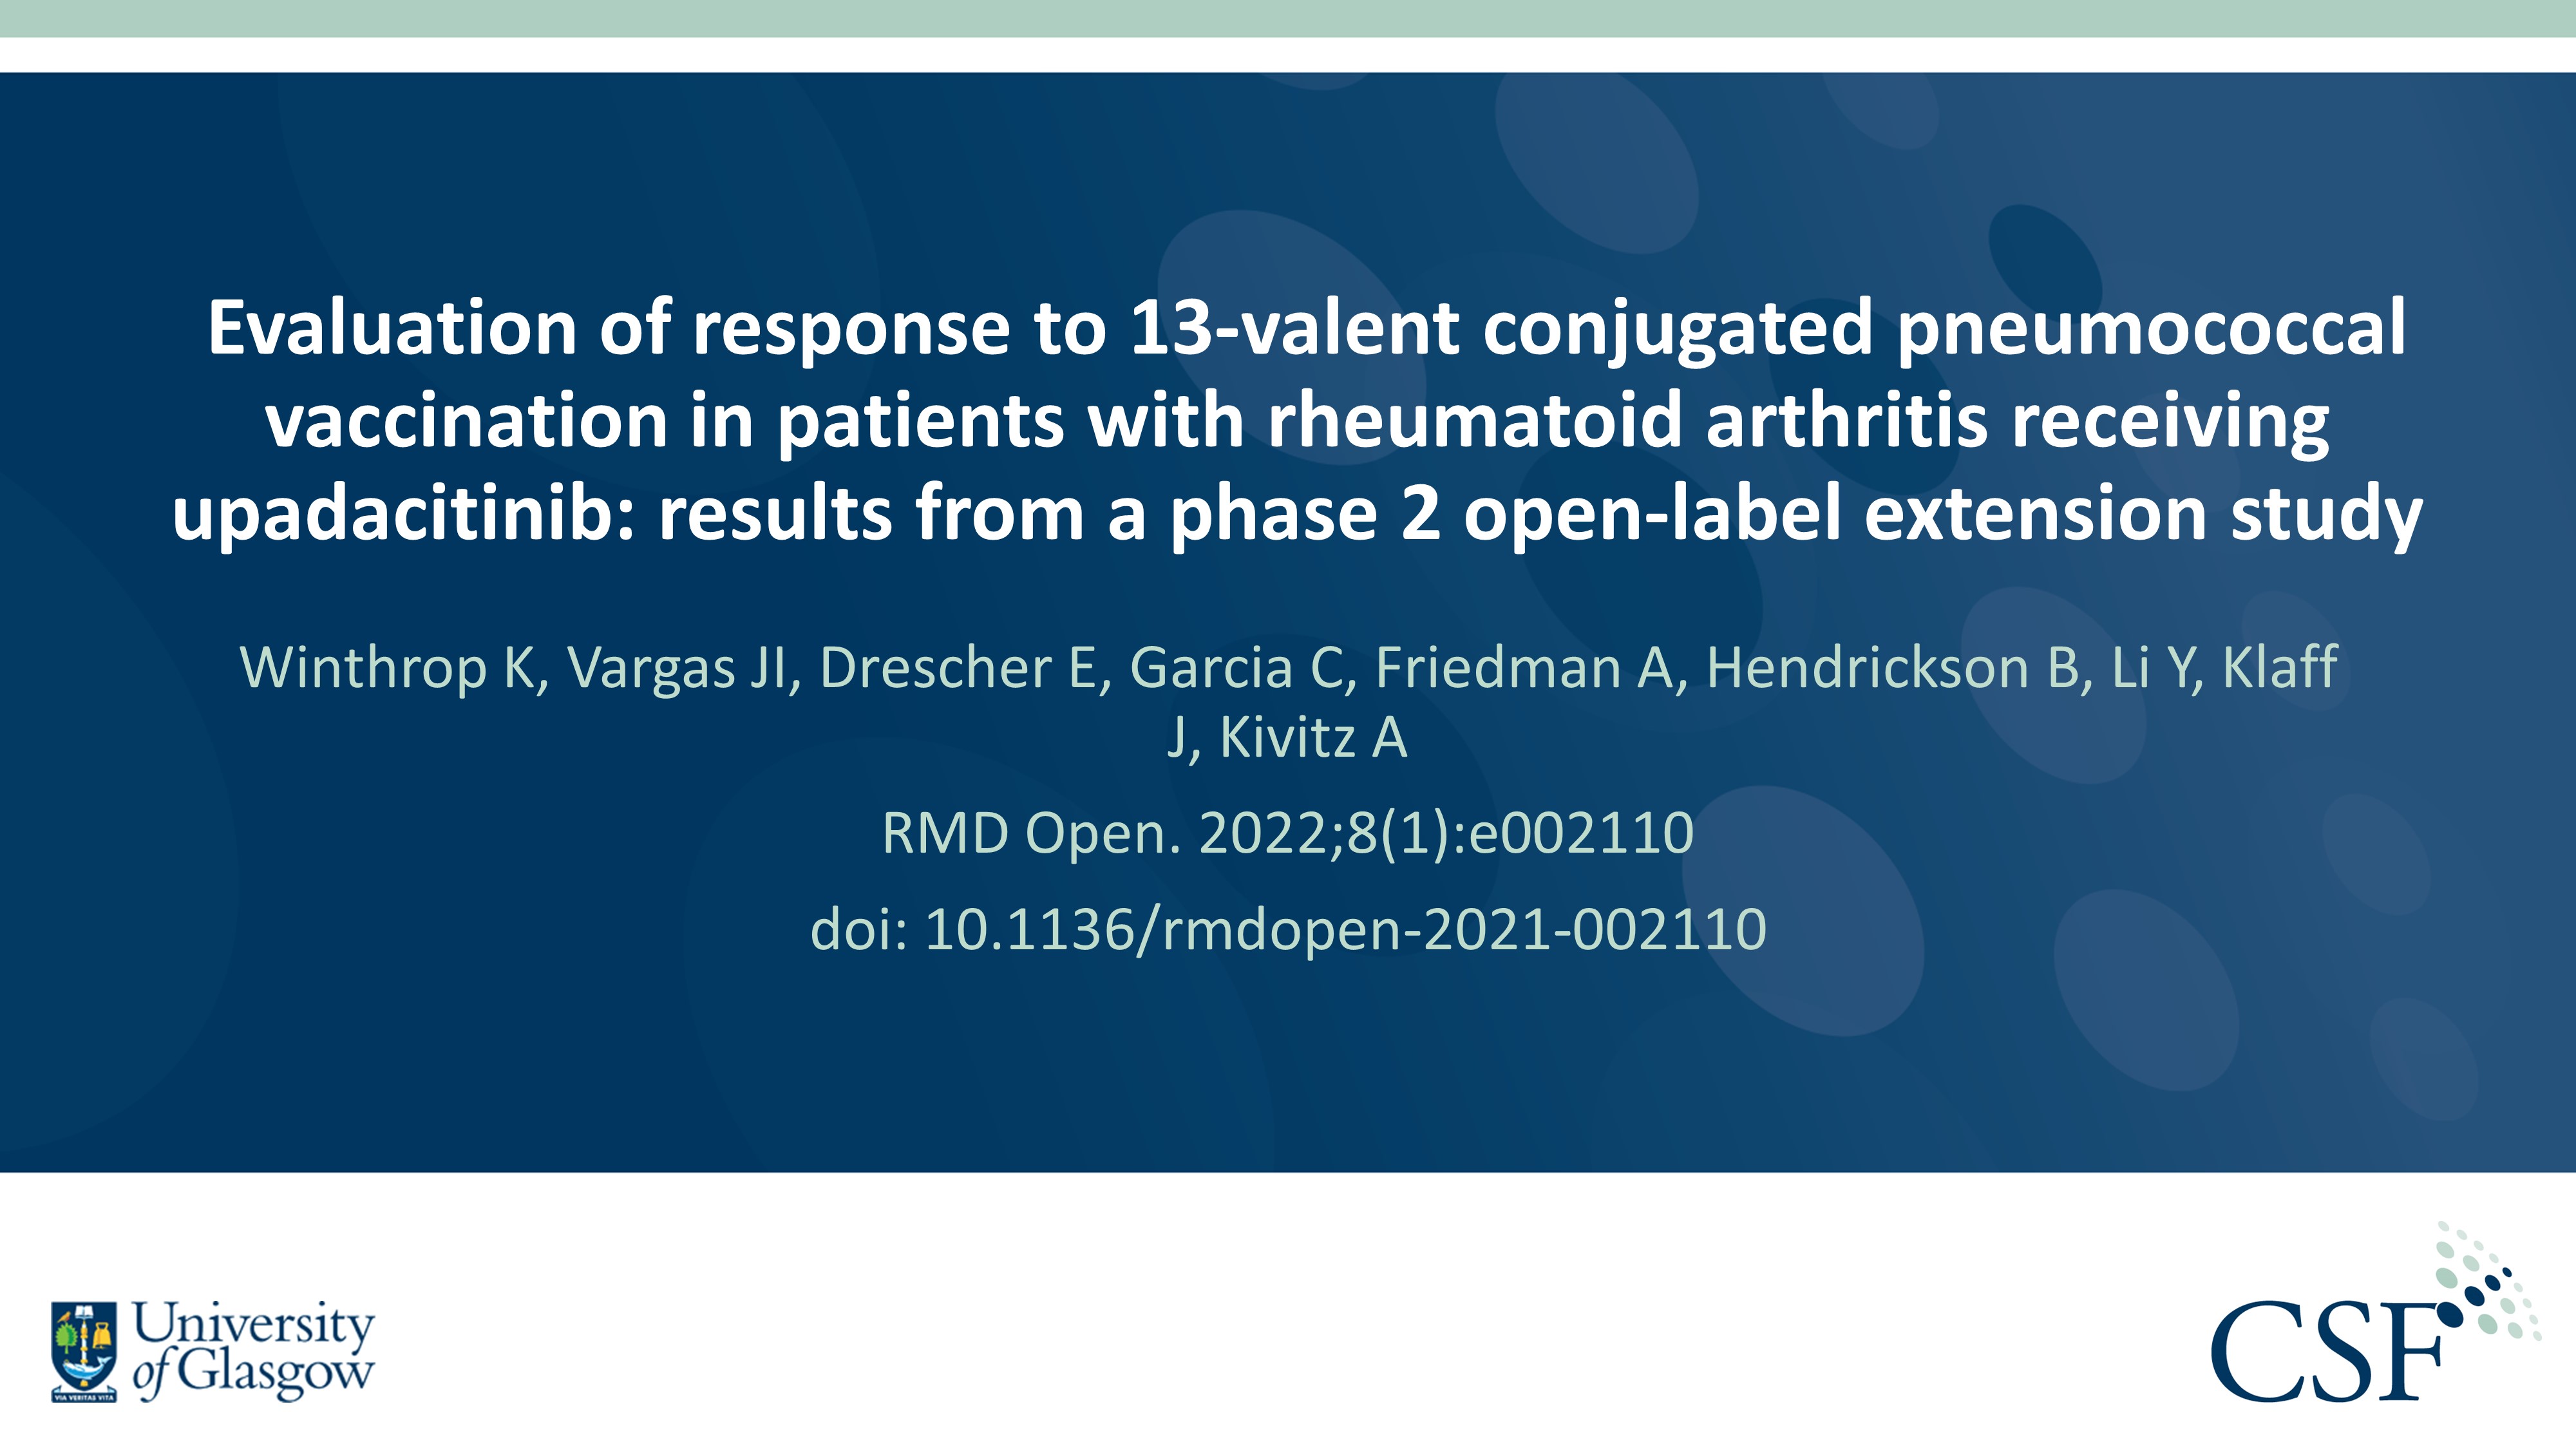 Publication thumbnail: Evaluation of response to 13-valent conjugated pneumococcal vaccination in patients with rheumatoid arthritis receiving upadacitinib: results from a phase 2 open-label extension study